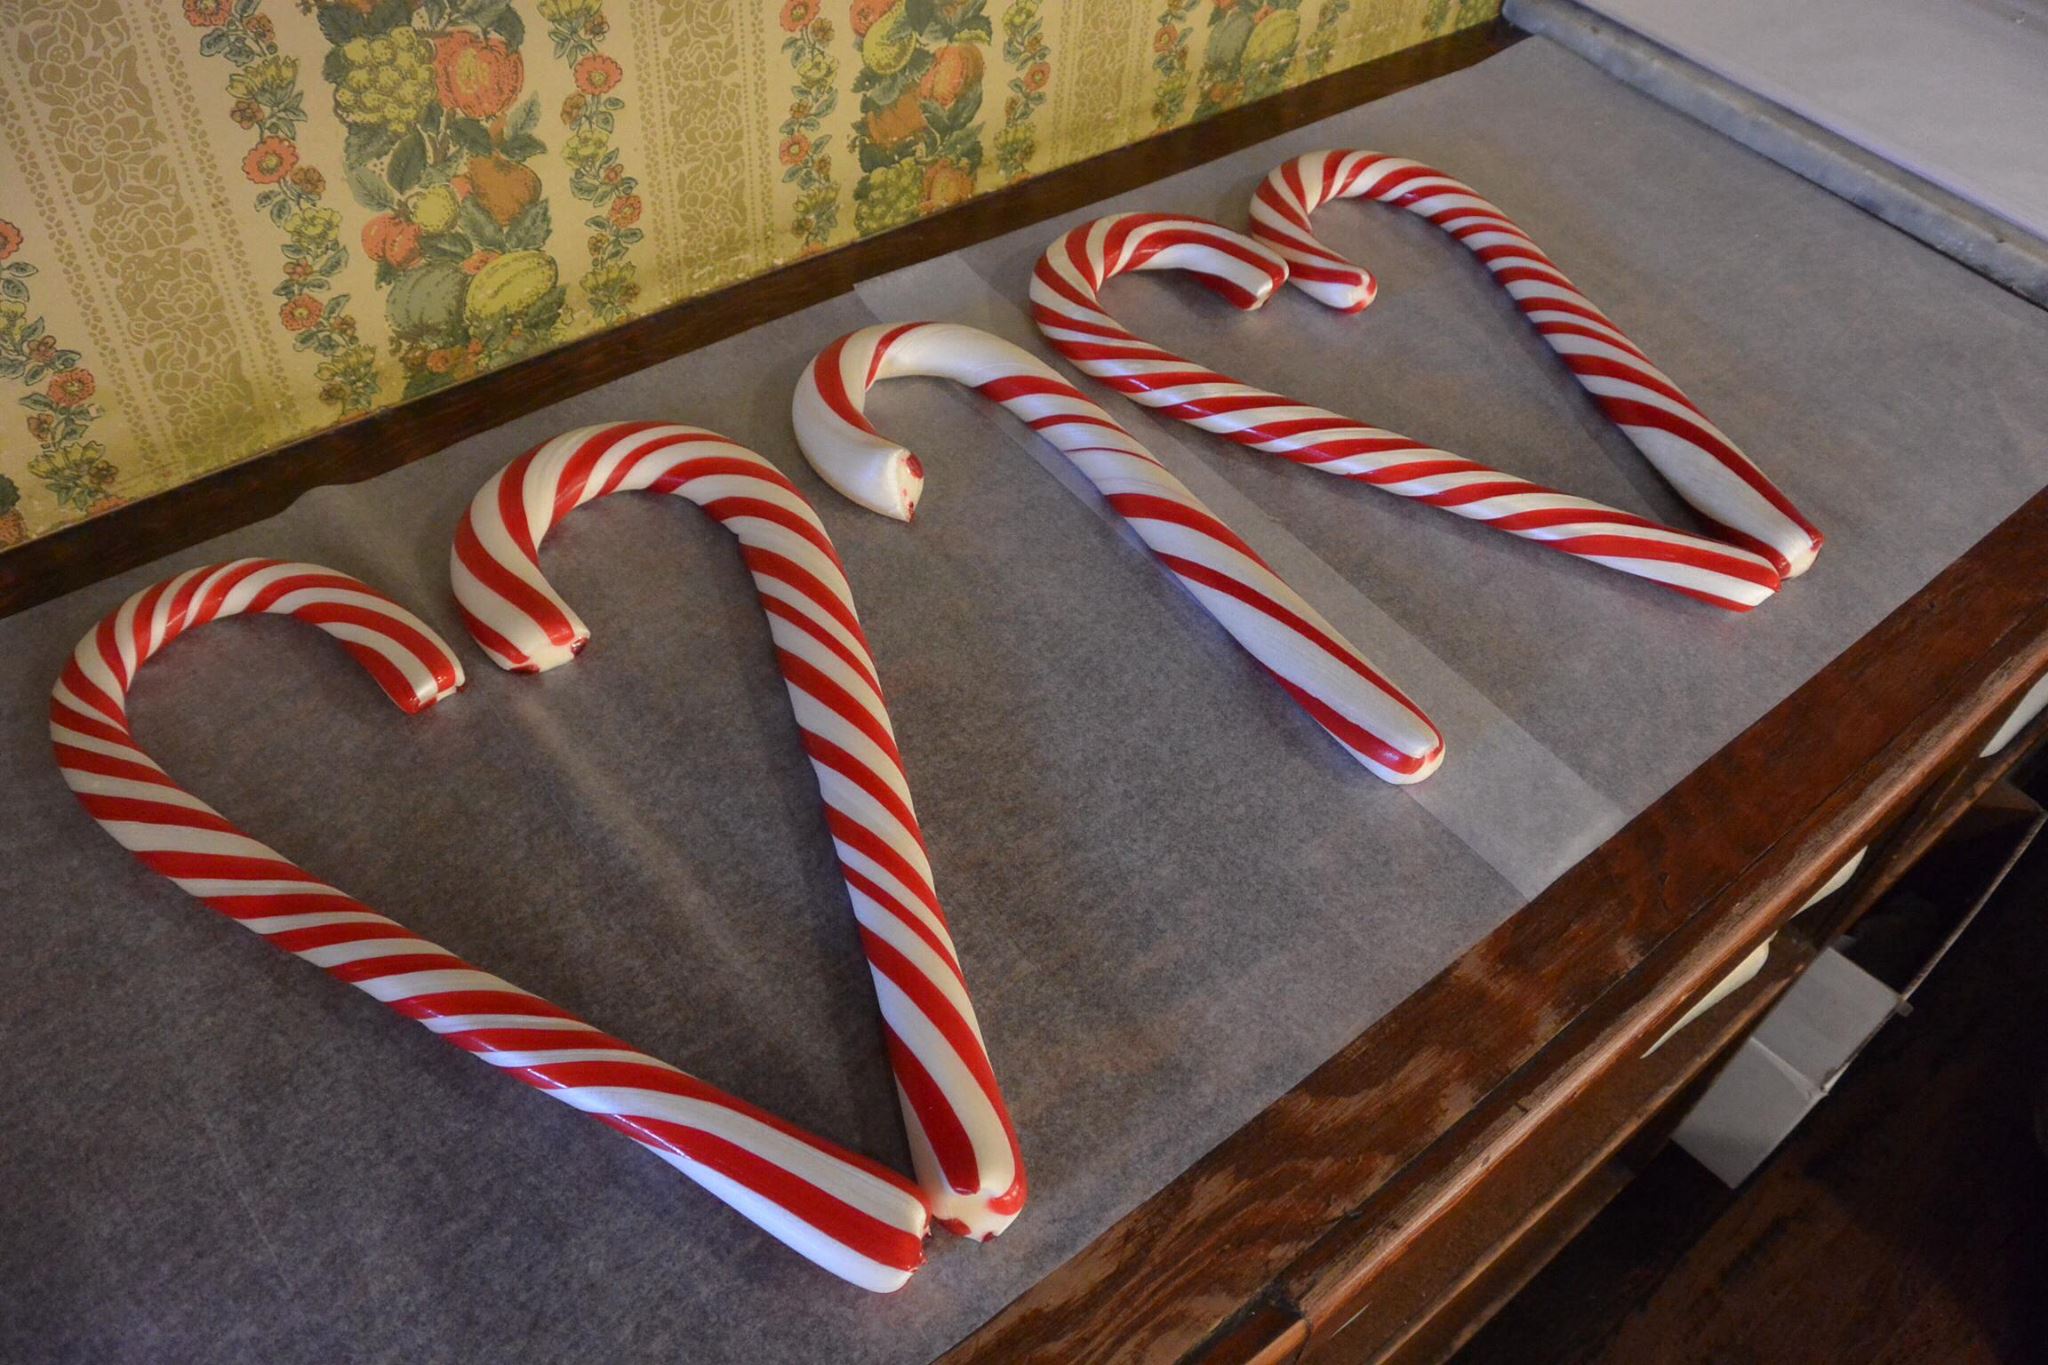 Making Candy Canes The Old Fashioned Way At Nelsons Candy Kitchen In 